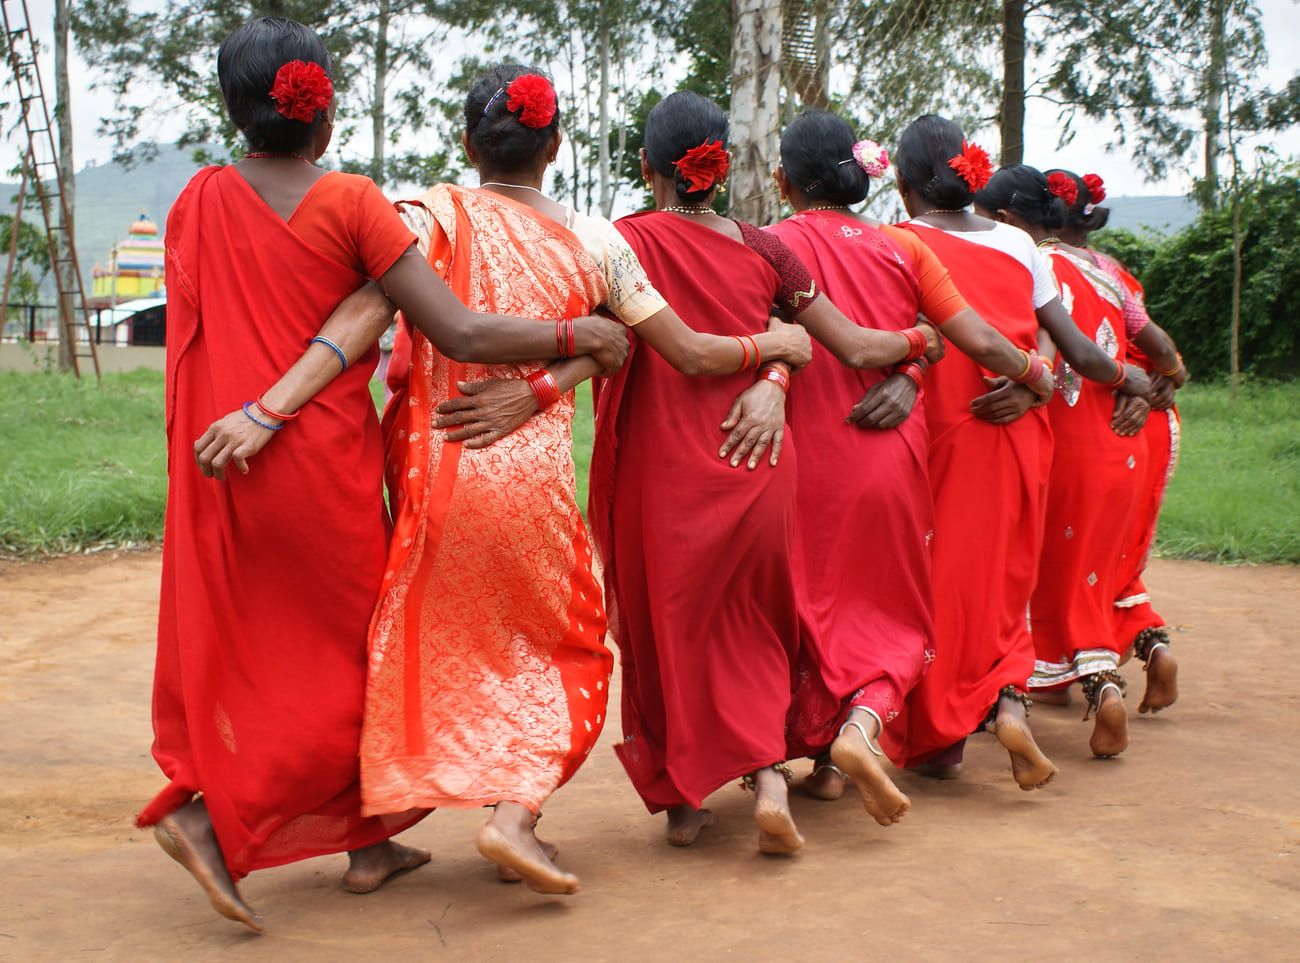 Women dressed in shades of red perform the traditional Porja tribal dance called dhimsa 